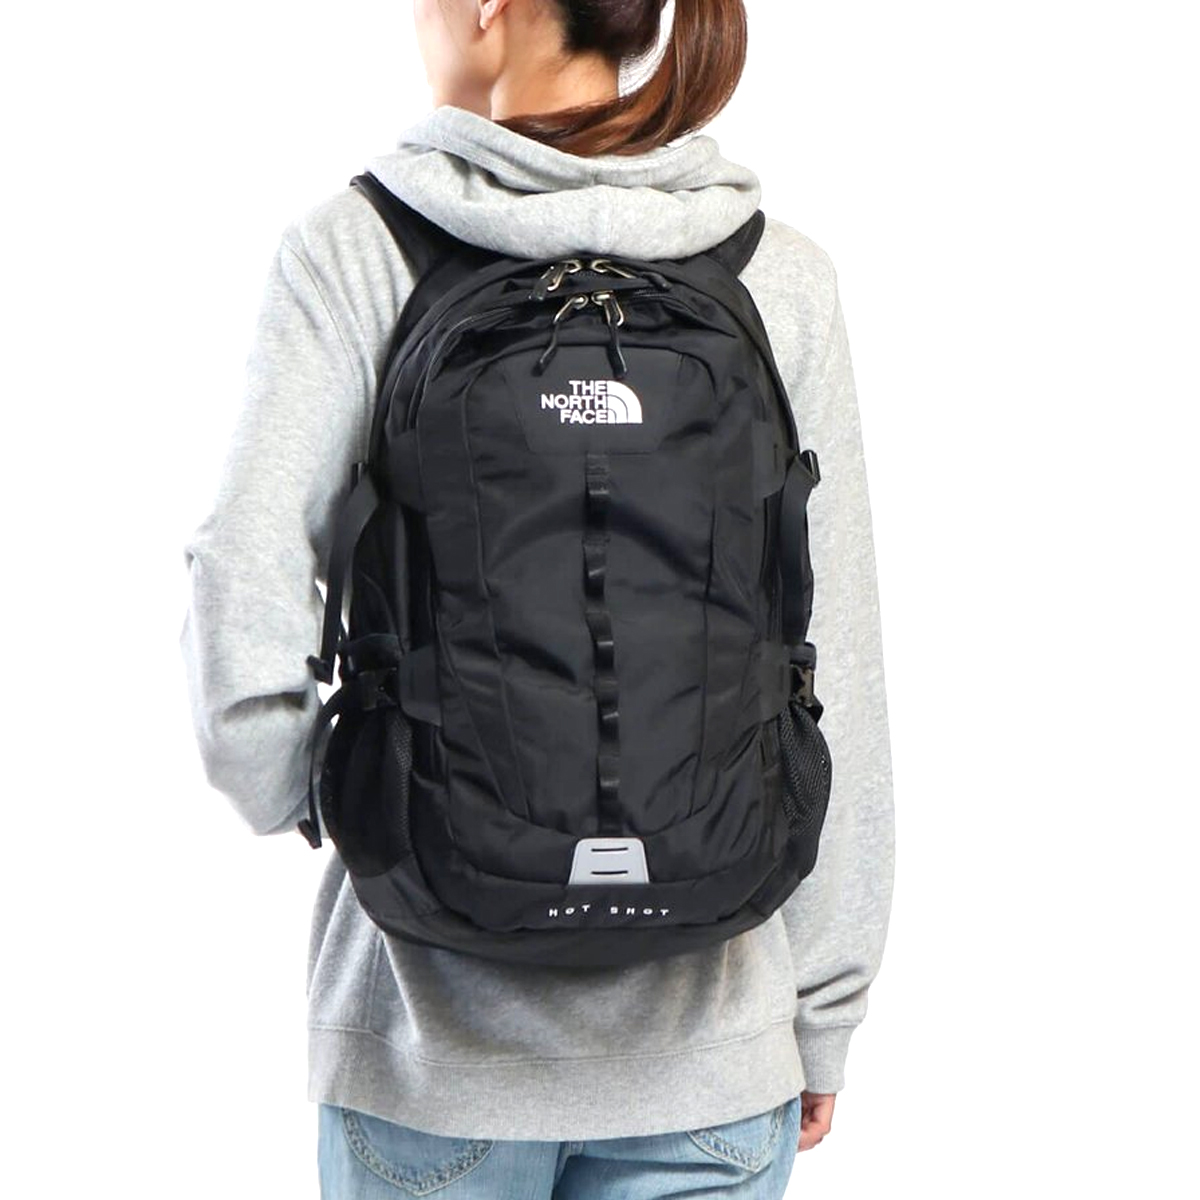 MELTING POT 公式ホームページ｜THE NORTH FACE HOTSHOT CL NM71862